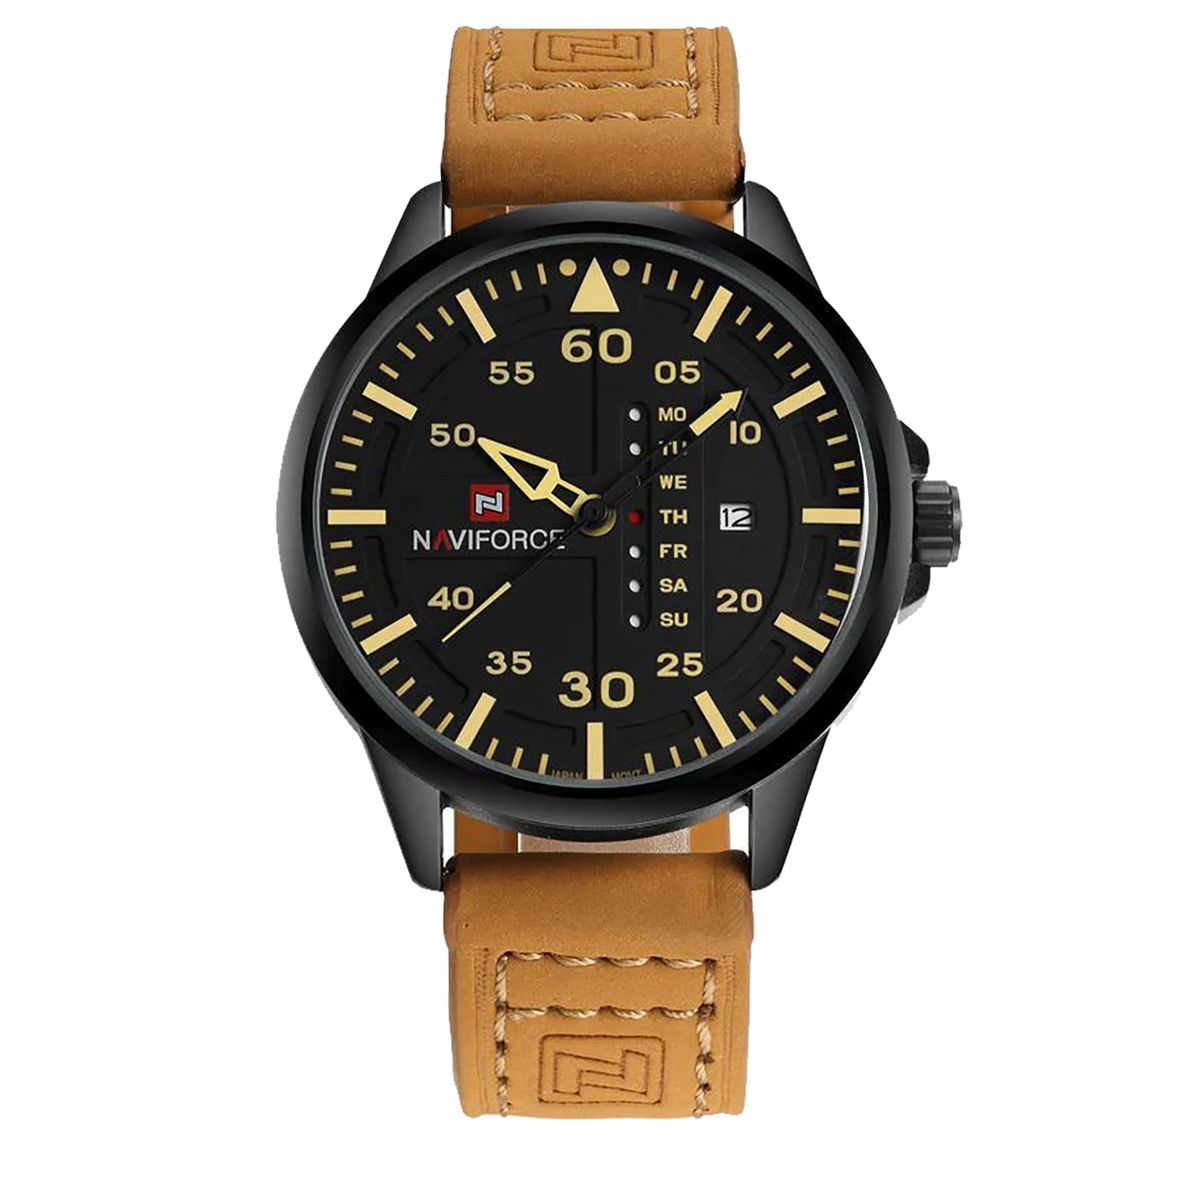 Nafivorce Brown leather strap with Black Dial, Watch for Men | Buy ...